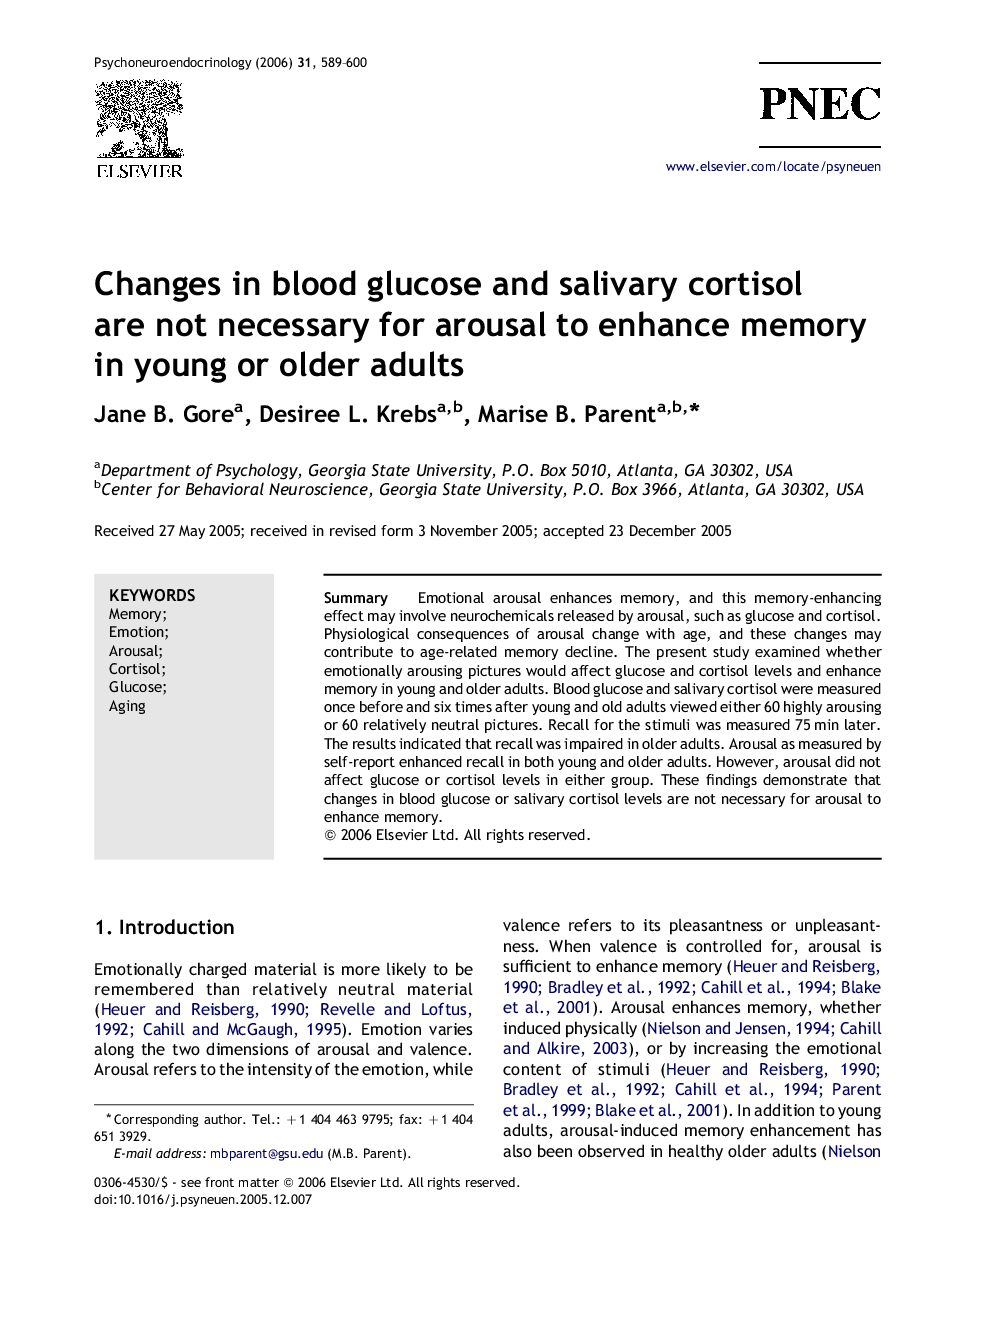 Changes in blood glucose and salivary cortisol are not necessary for arousal to enhance memory in young or older adults